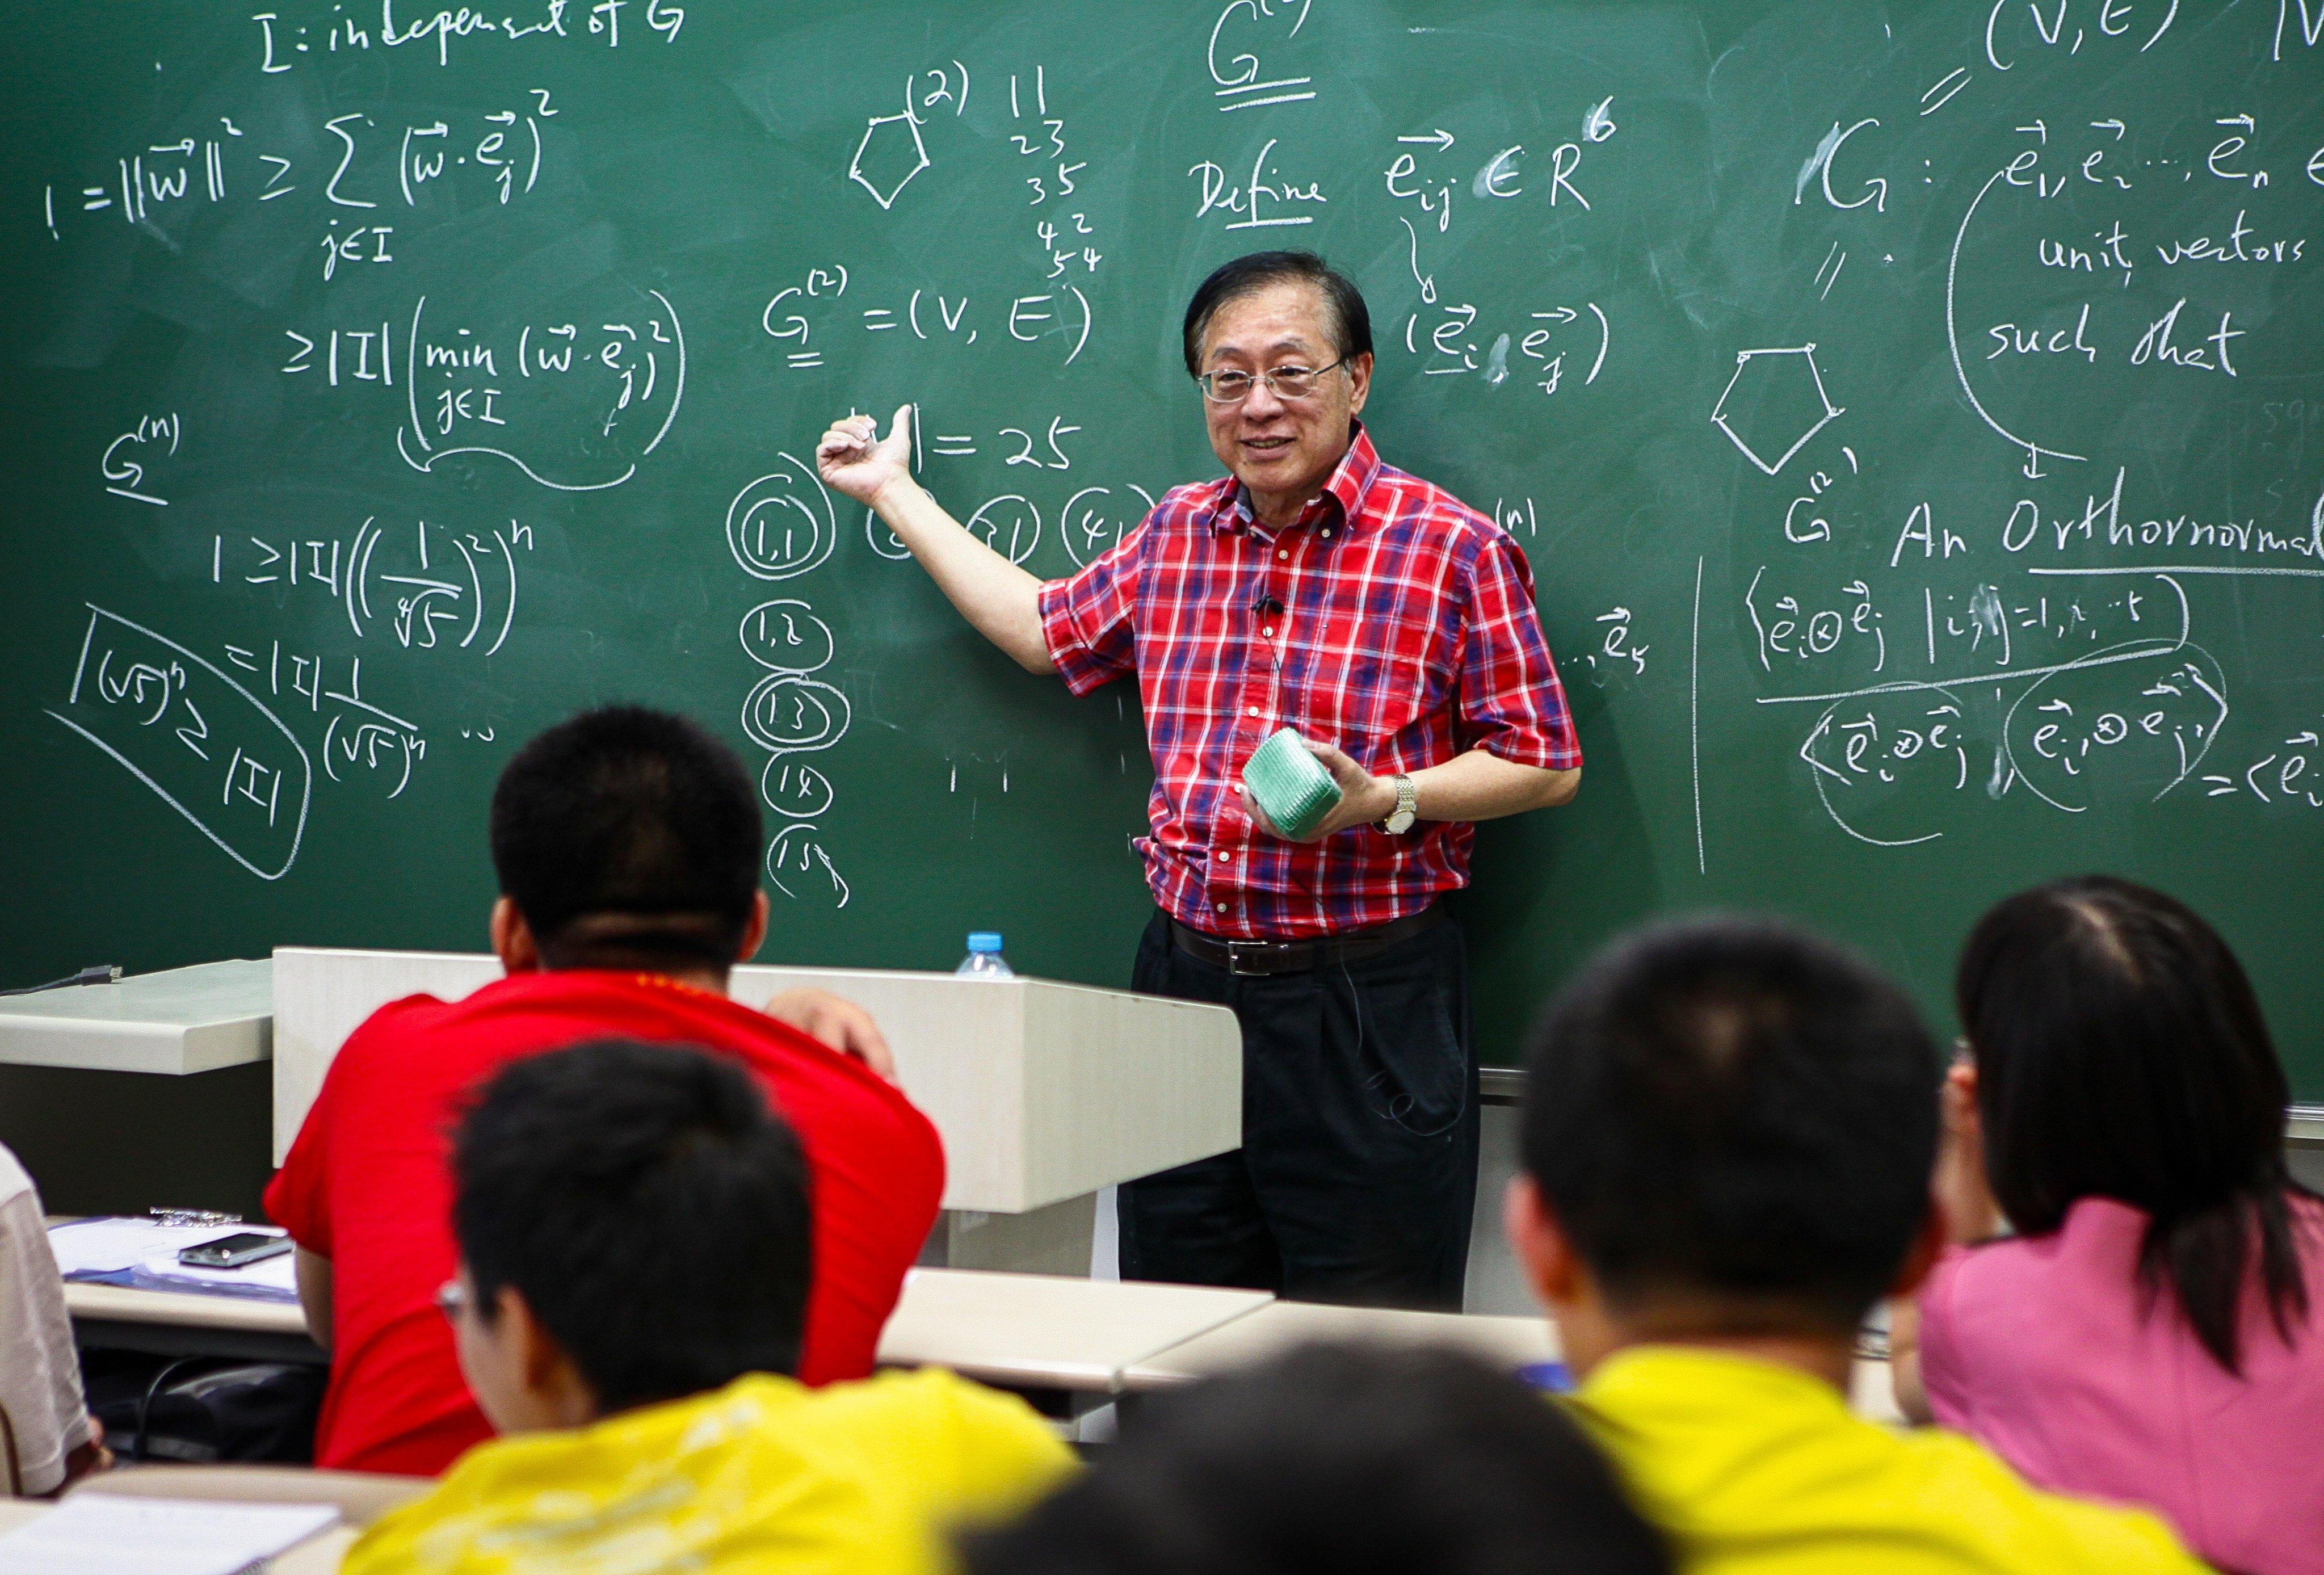 China’s President Xi Jinping has urged Andrew Chi-Chih Yao, pictured, to further help the country achieve self-reliance and build it into an educational, scientific and technological powerhouse. Photo: Tsinghua University